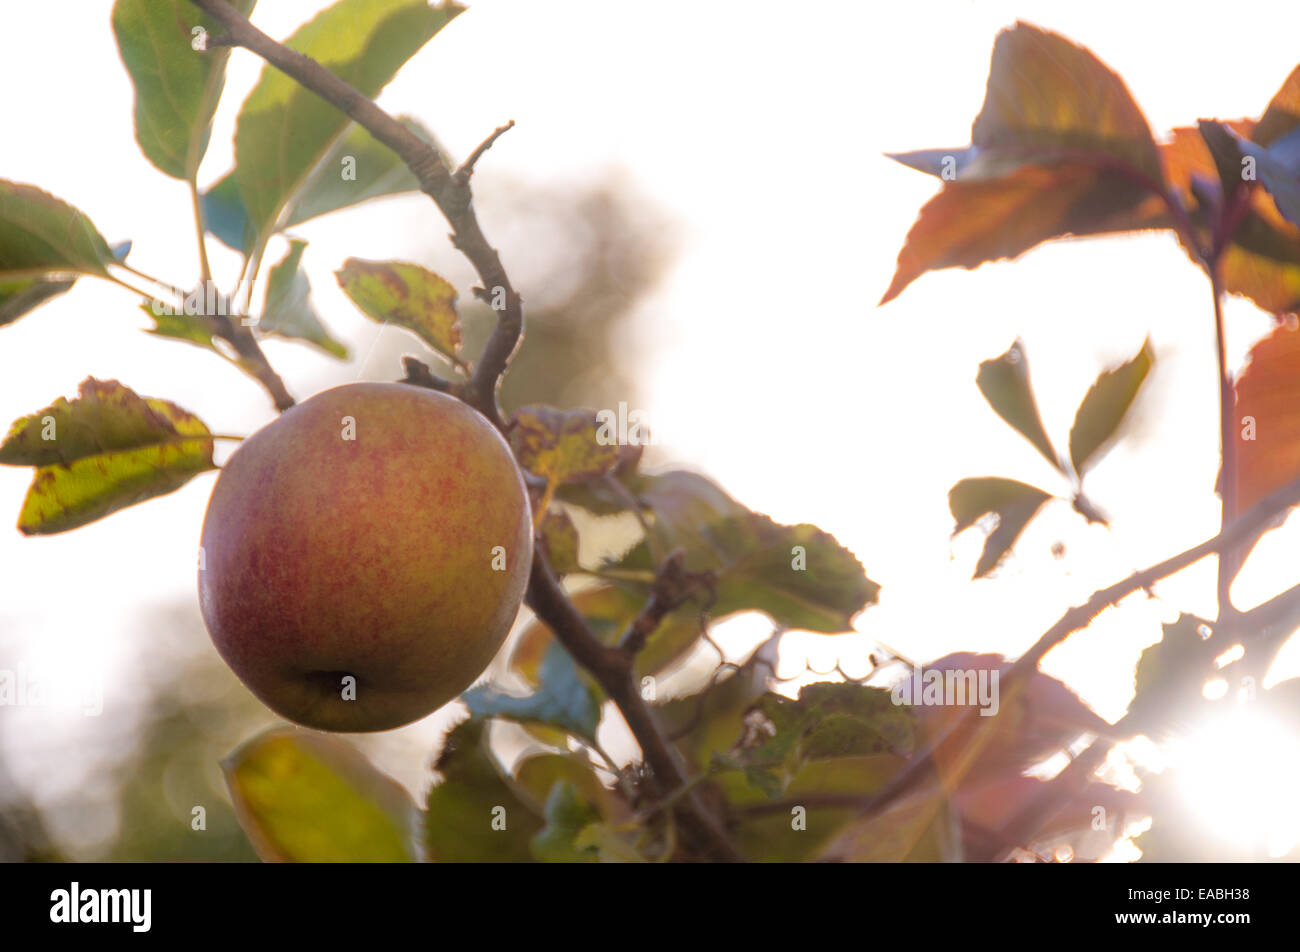 Organic apple growing in an orchard Stock Photo